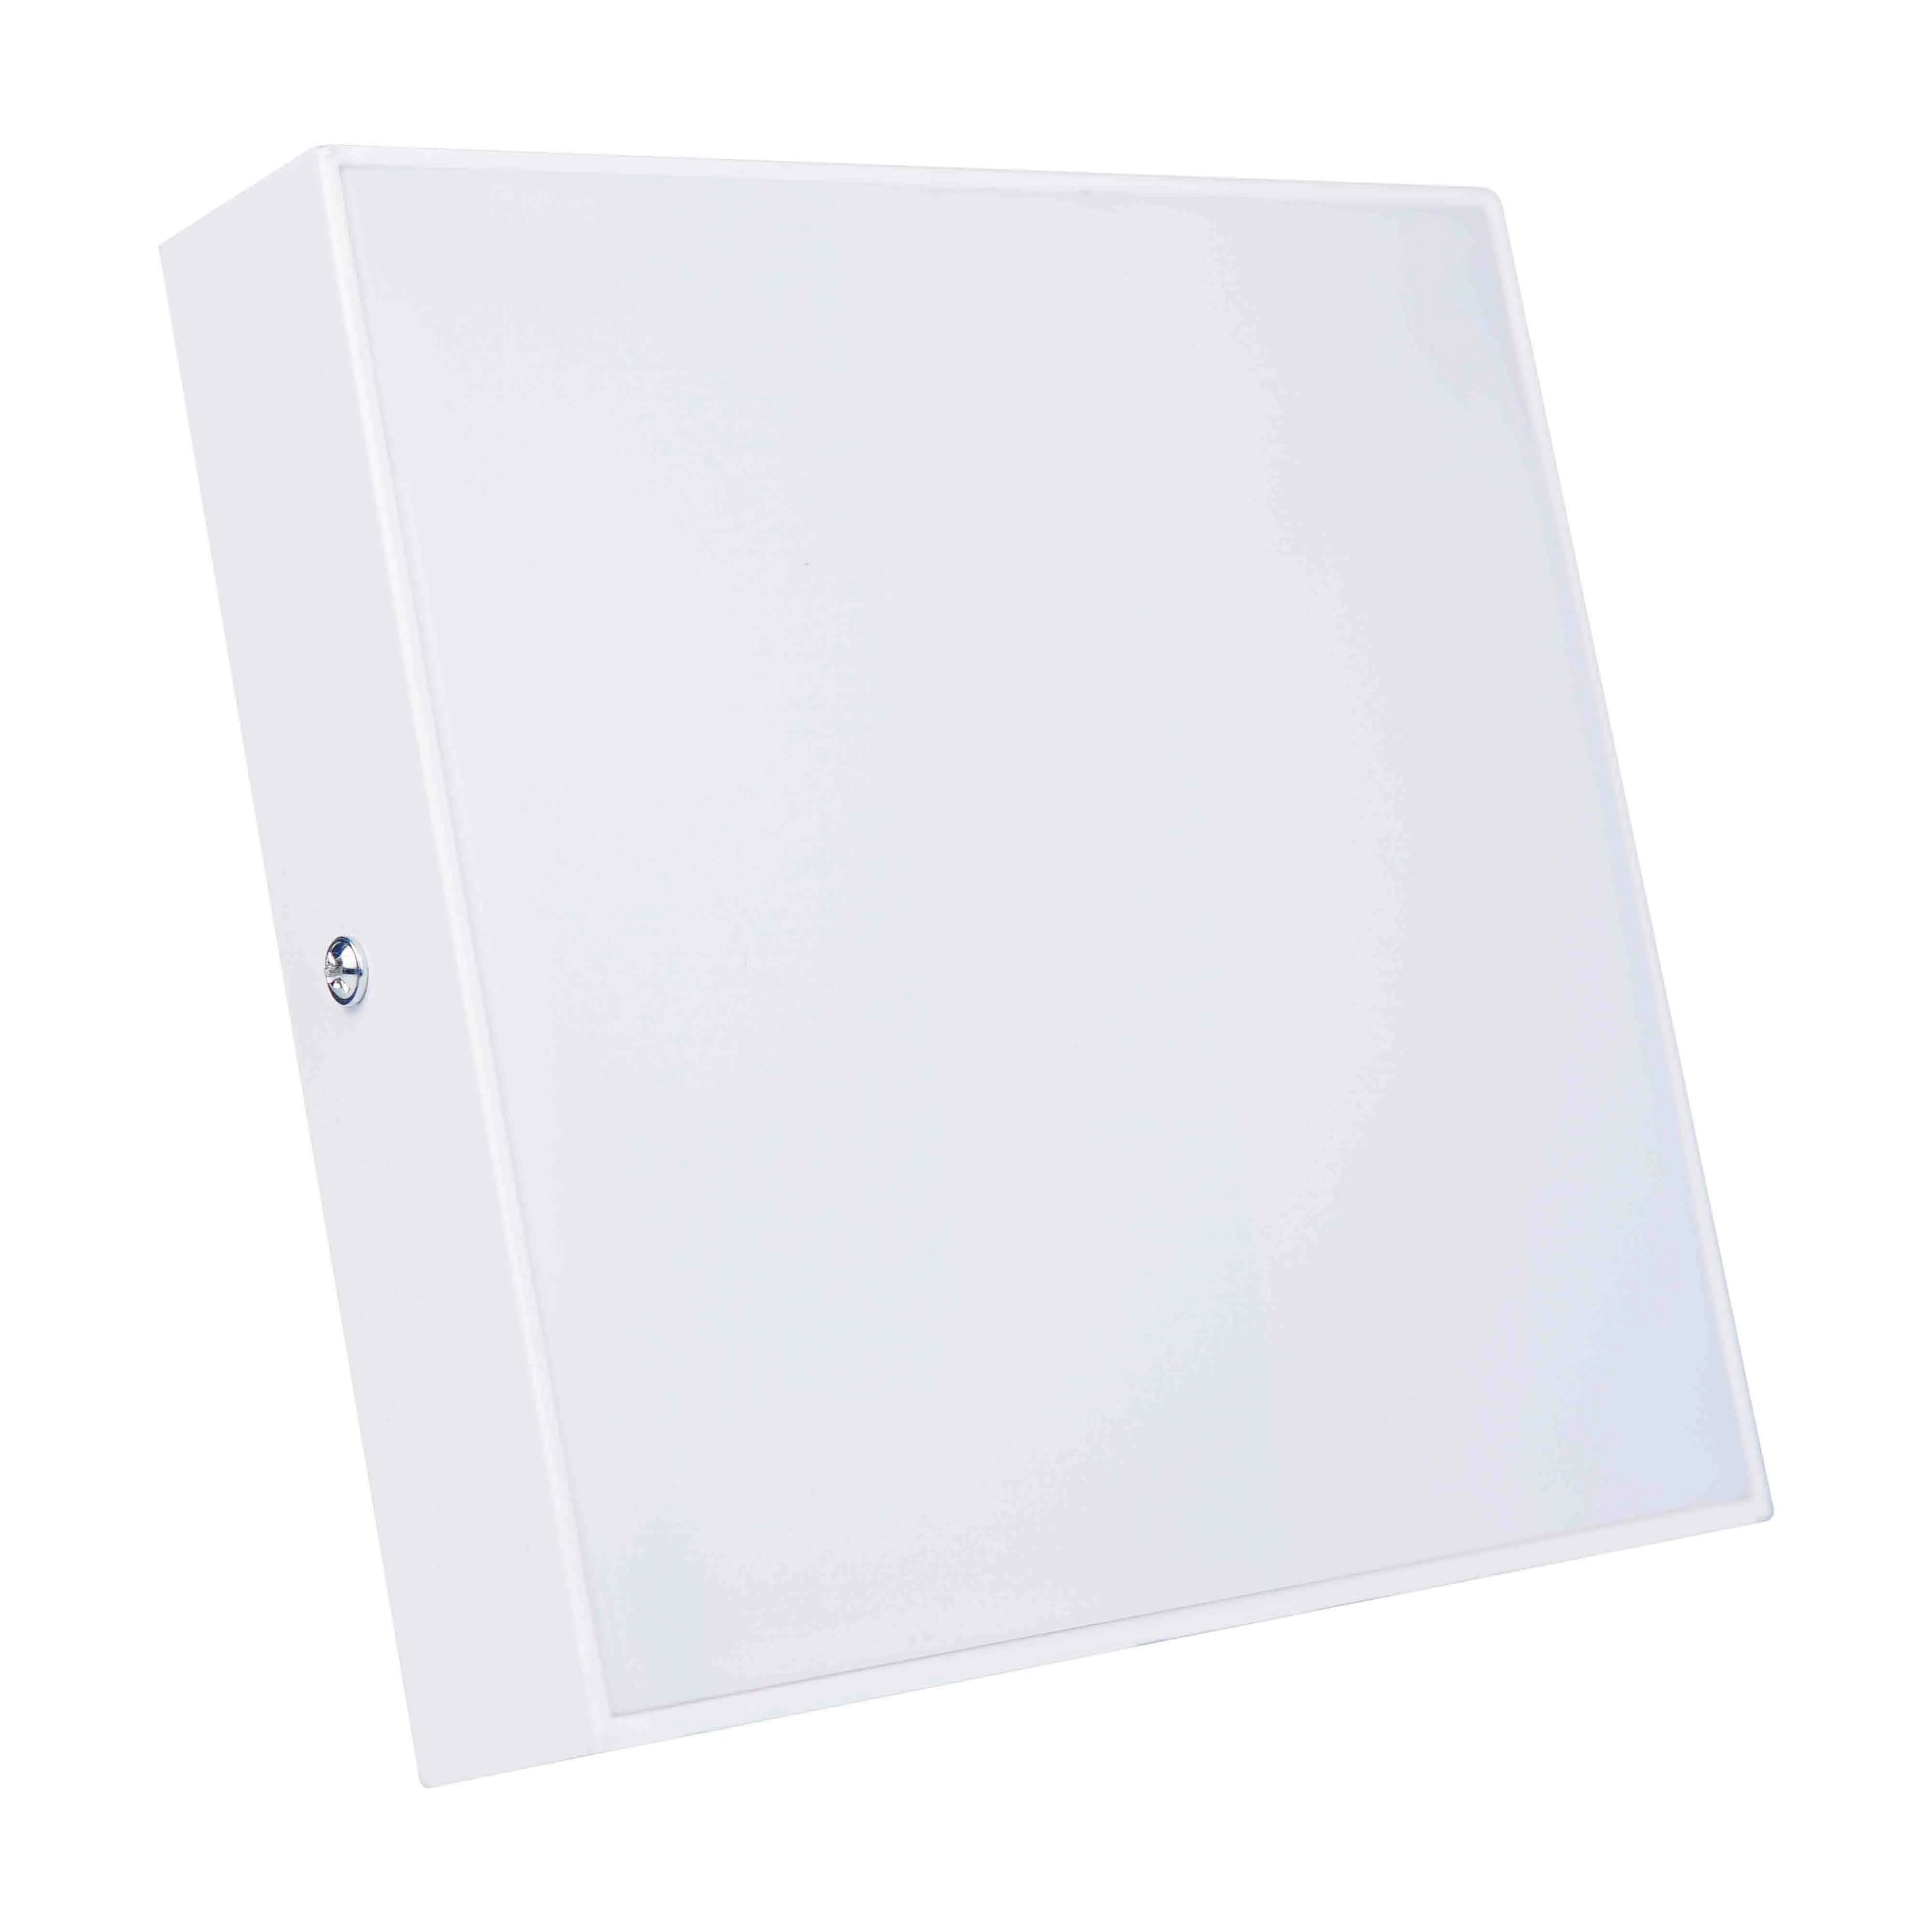 A Look at the Advantages of LED Panel Lights